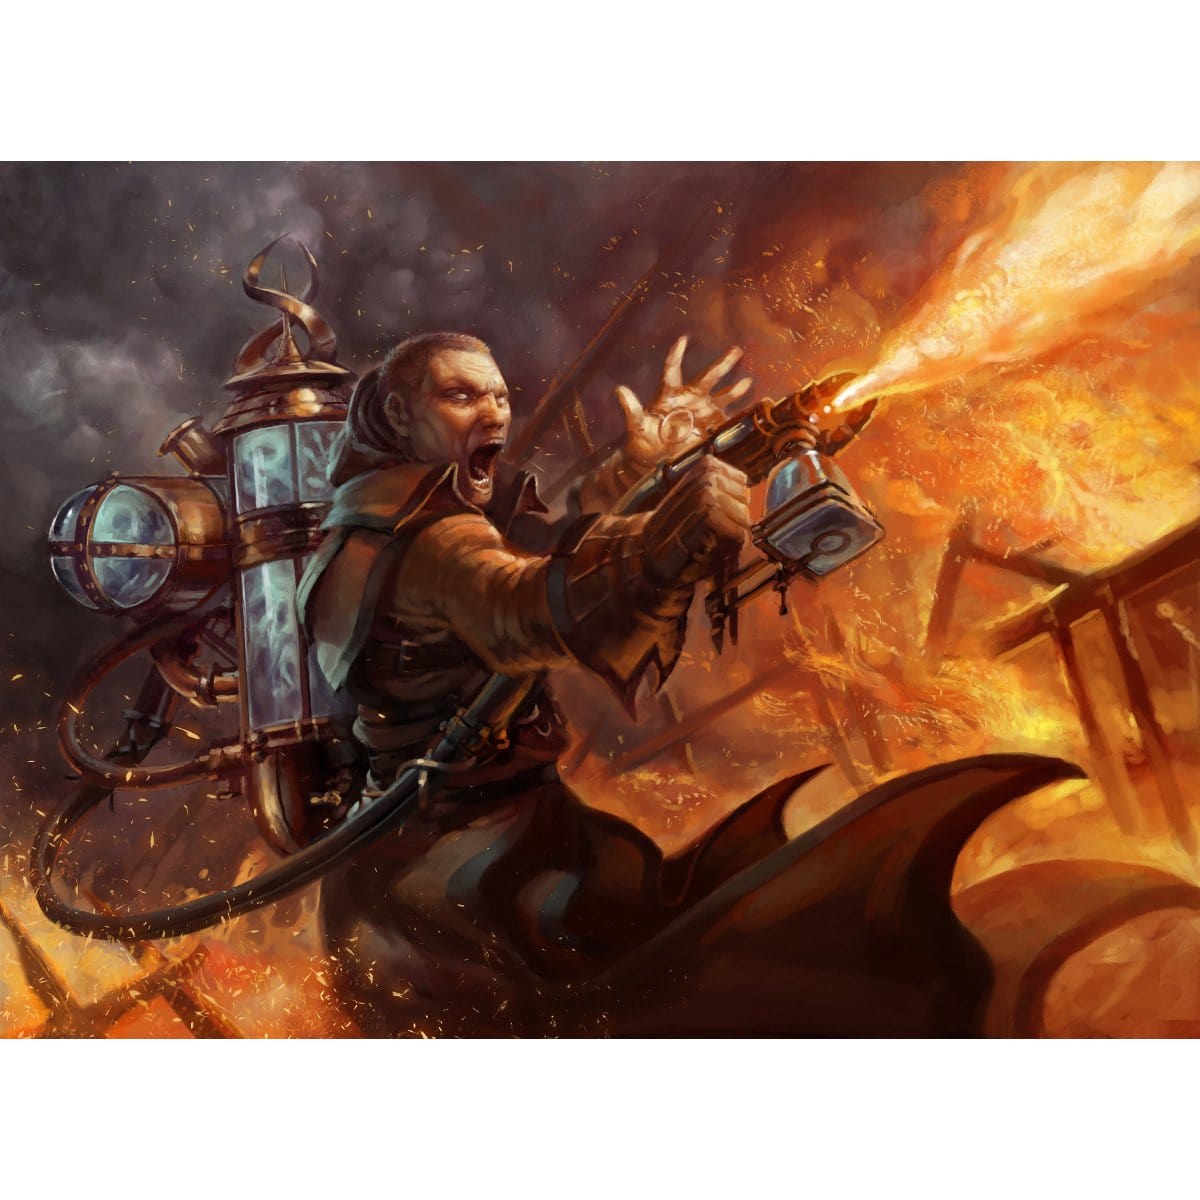 Rage Thrower Print - Print - Original Magic Art - Accessories for Magic the Gathering and other card games